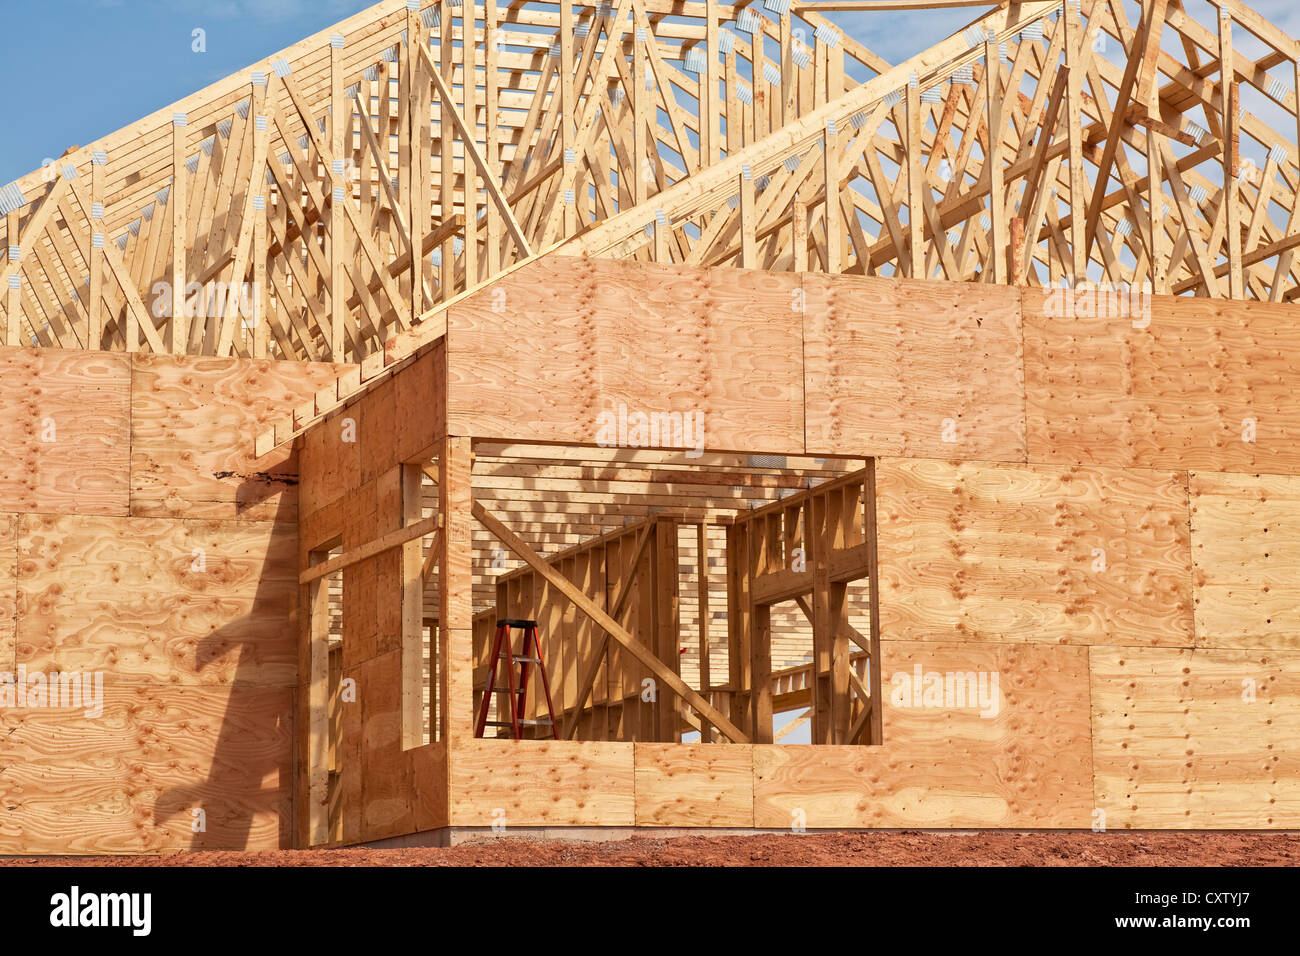 New construction of a wooden building or house. Stock Photo